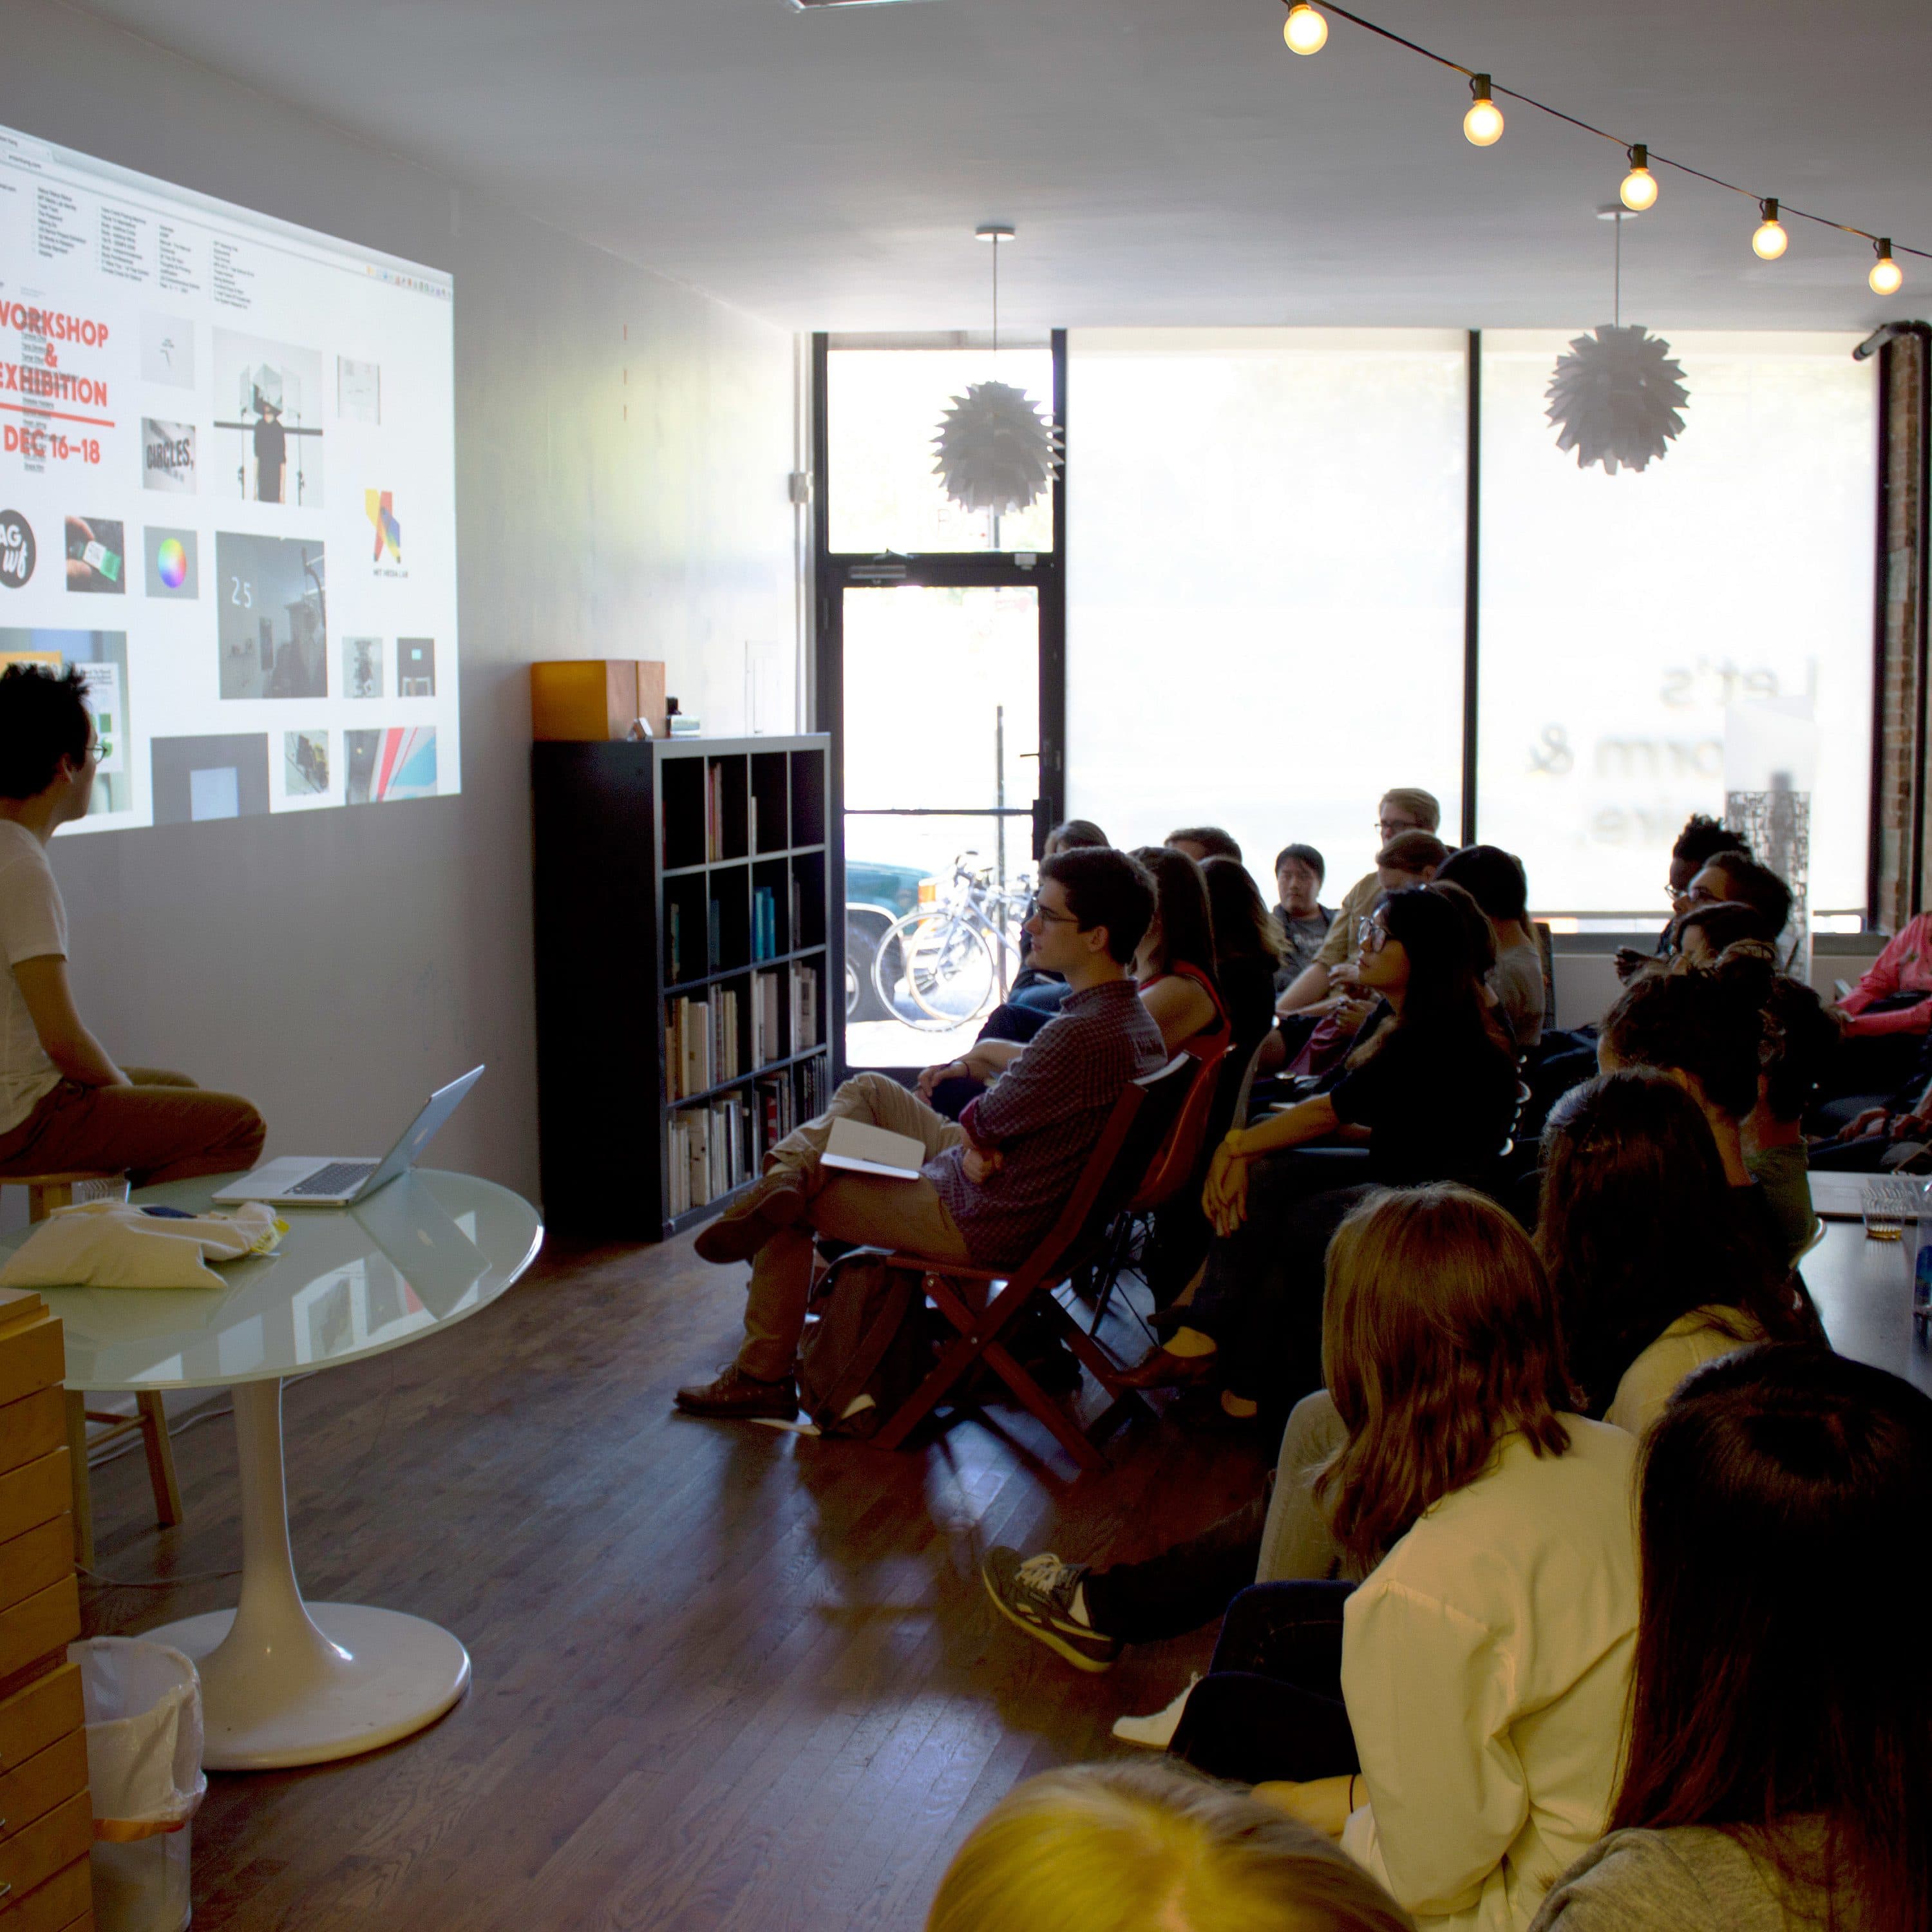 A person is giving a presentation in a room, using a projector to display images and text on a wall. Several people sit in chairs, attentively watching the presentation. The room features a wooden floor, string lights, shelving, and computers on desks.